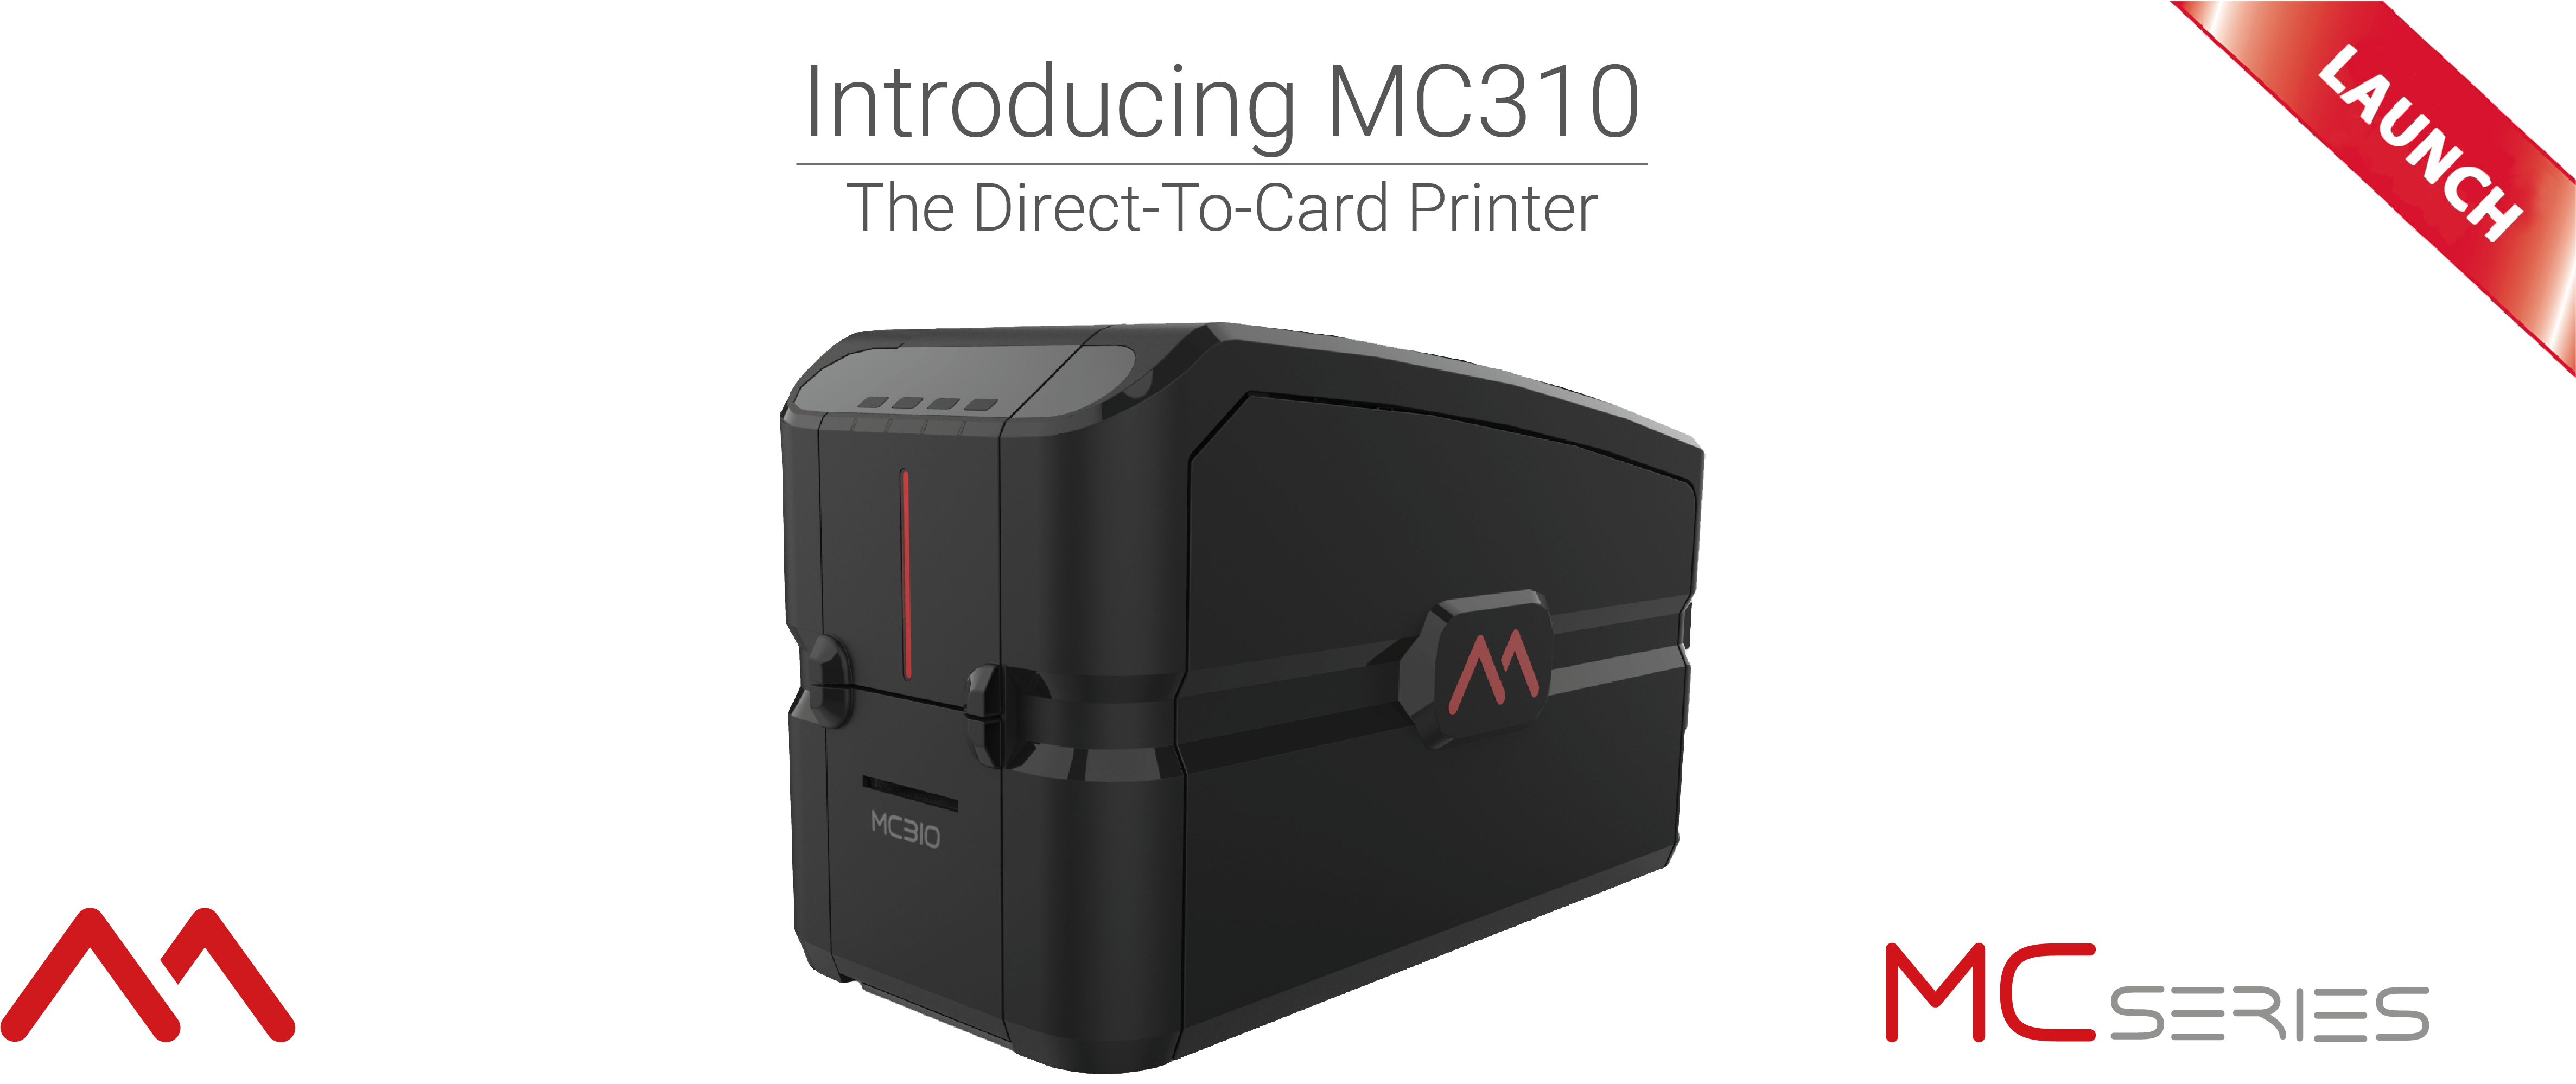 MC310 launch direct-to-card